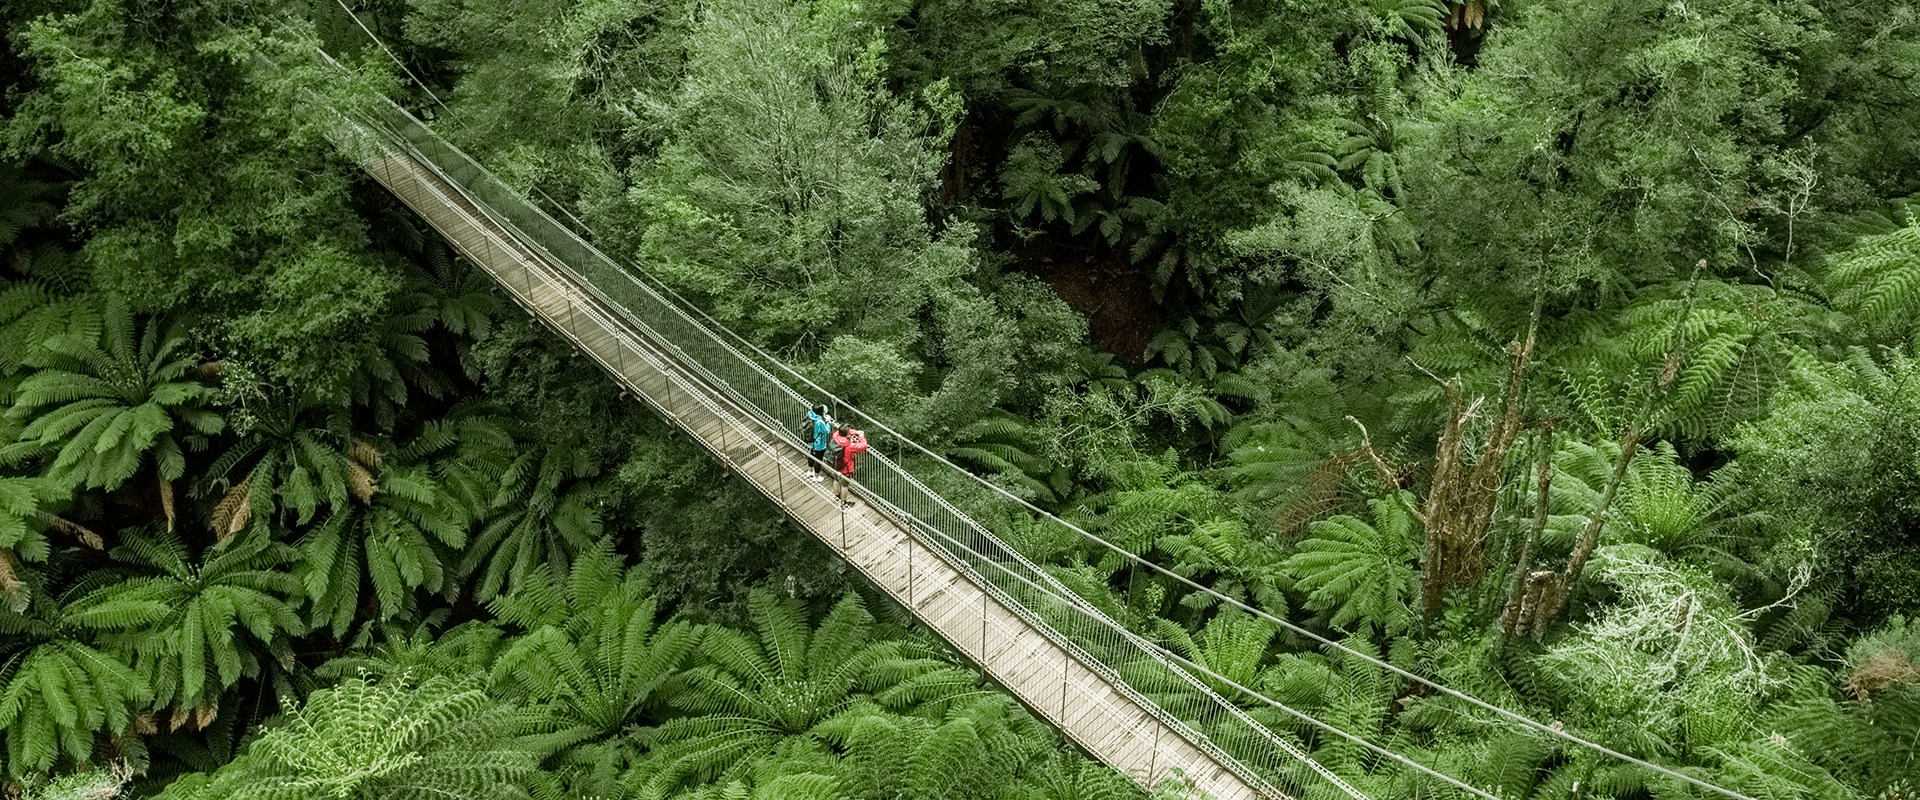 Two people stand on a suspension bridge looking out into a lush fern filled gully.